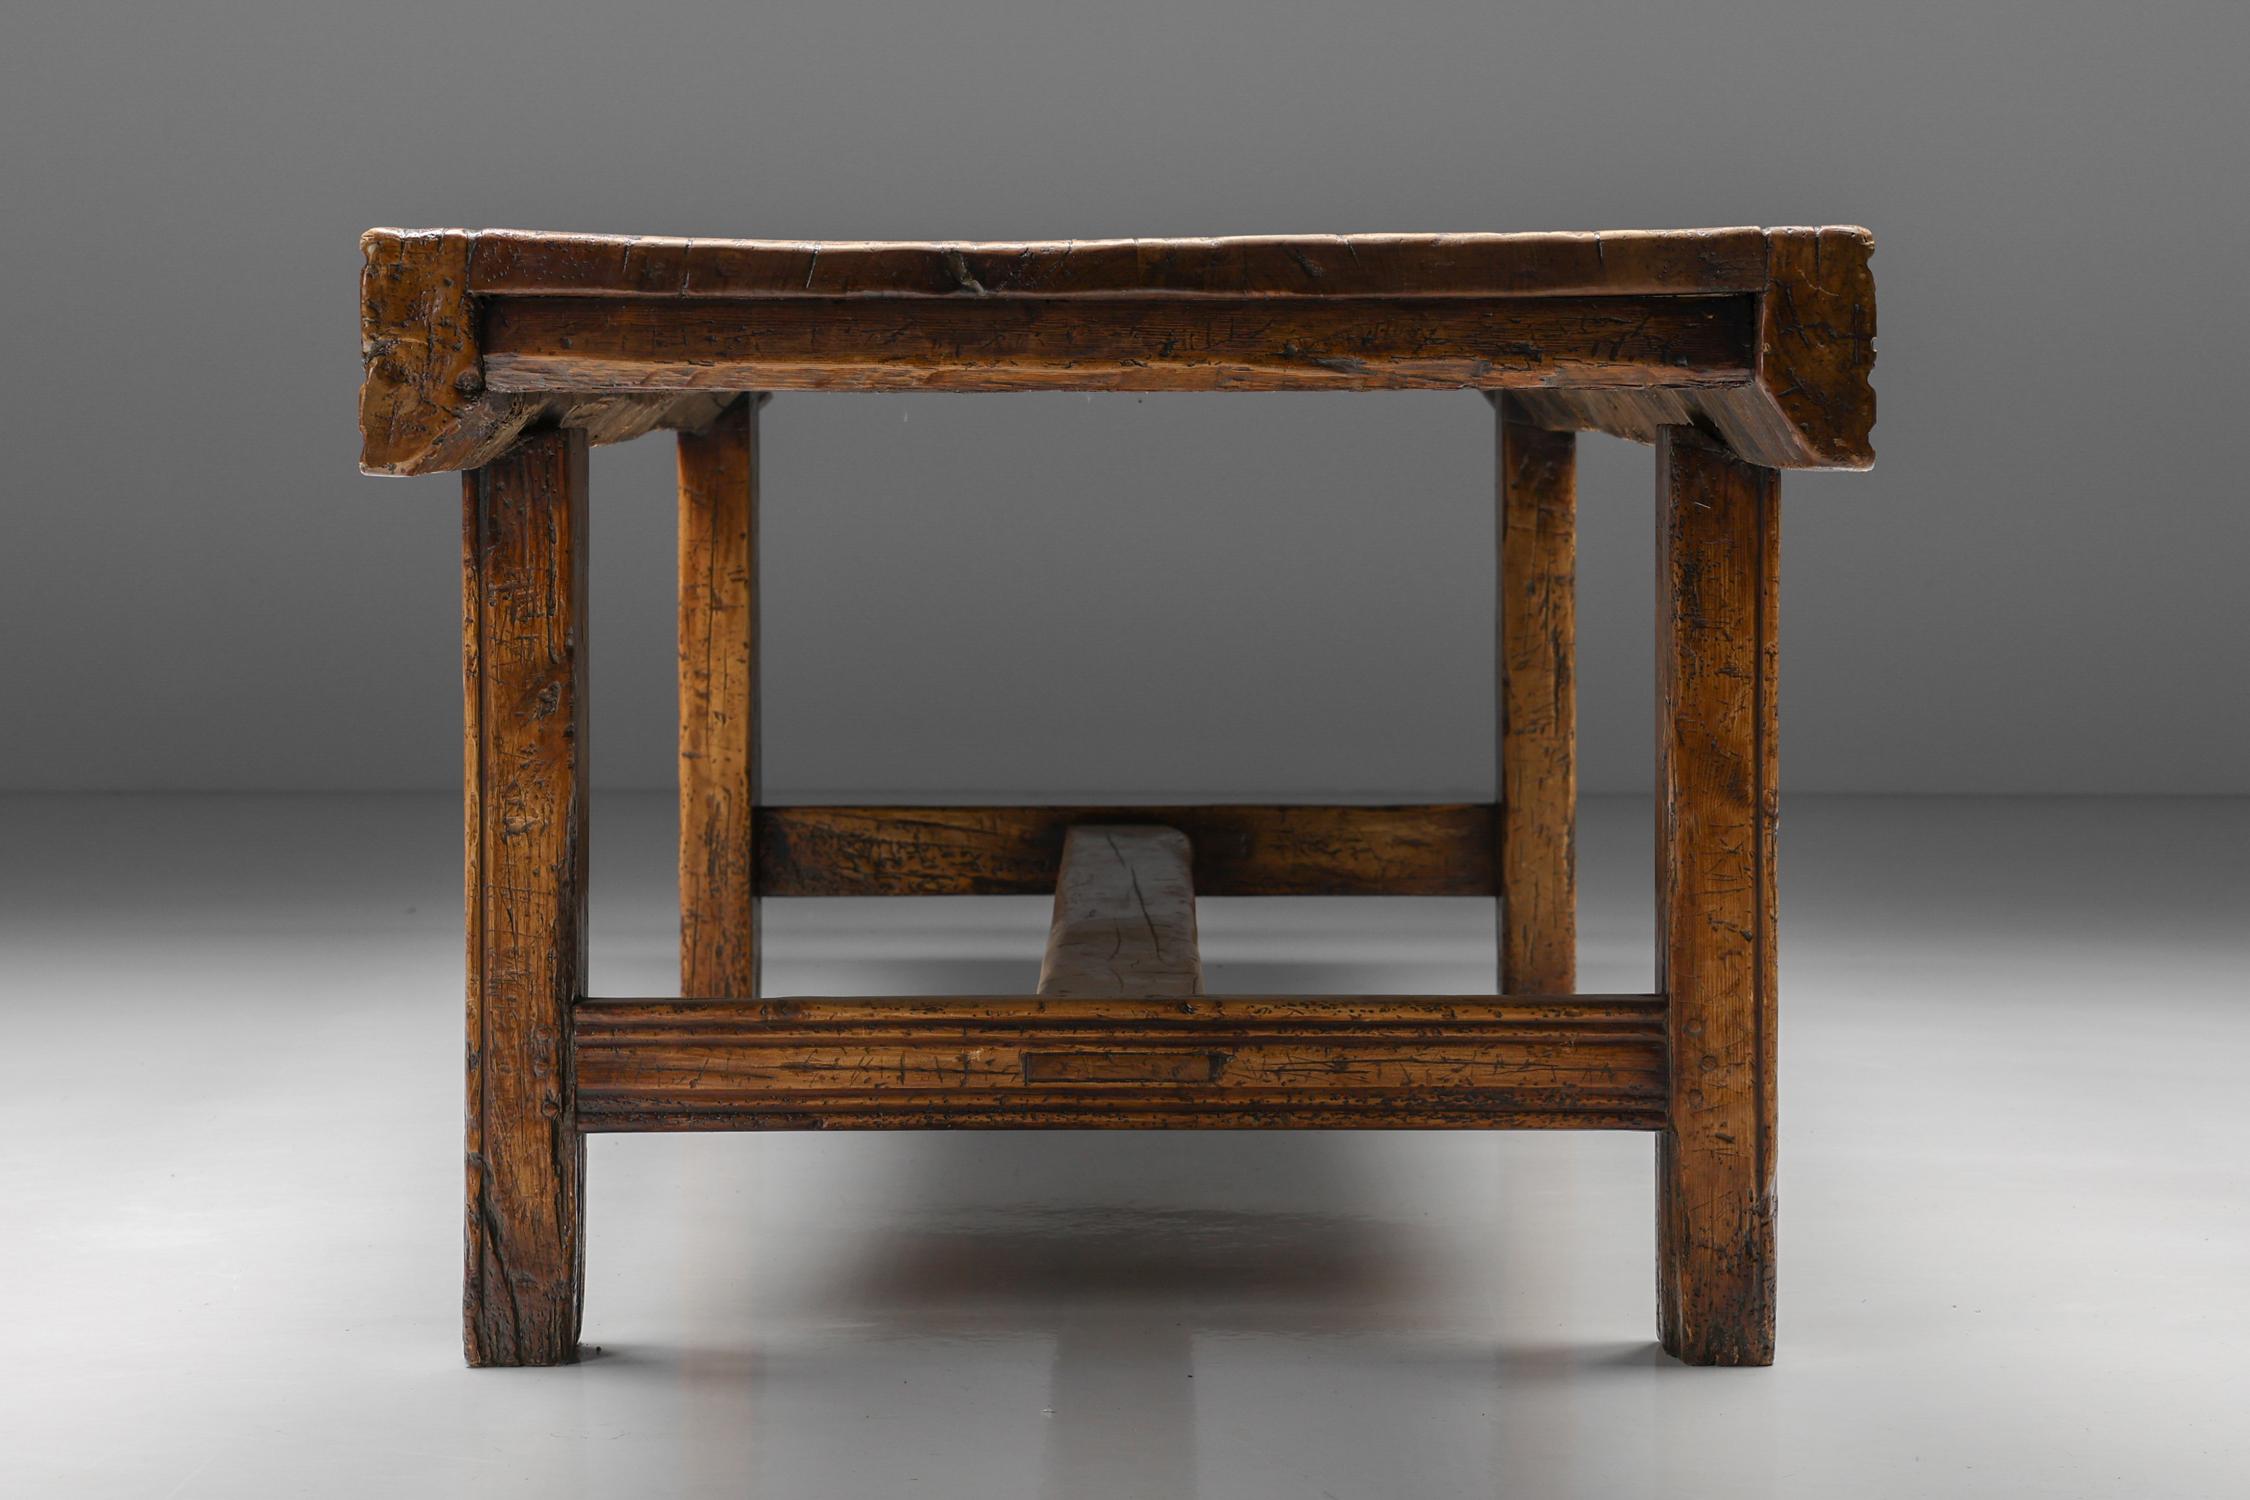 French Provincial Refectory Wooden Dining Table, Rustic, France, 19th Century For Sale